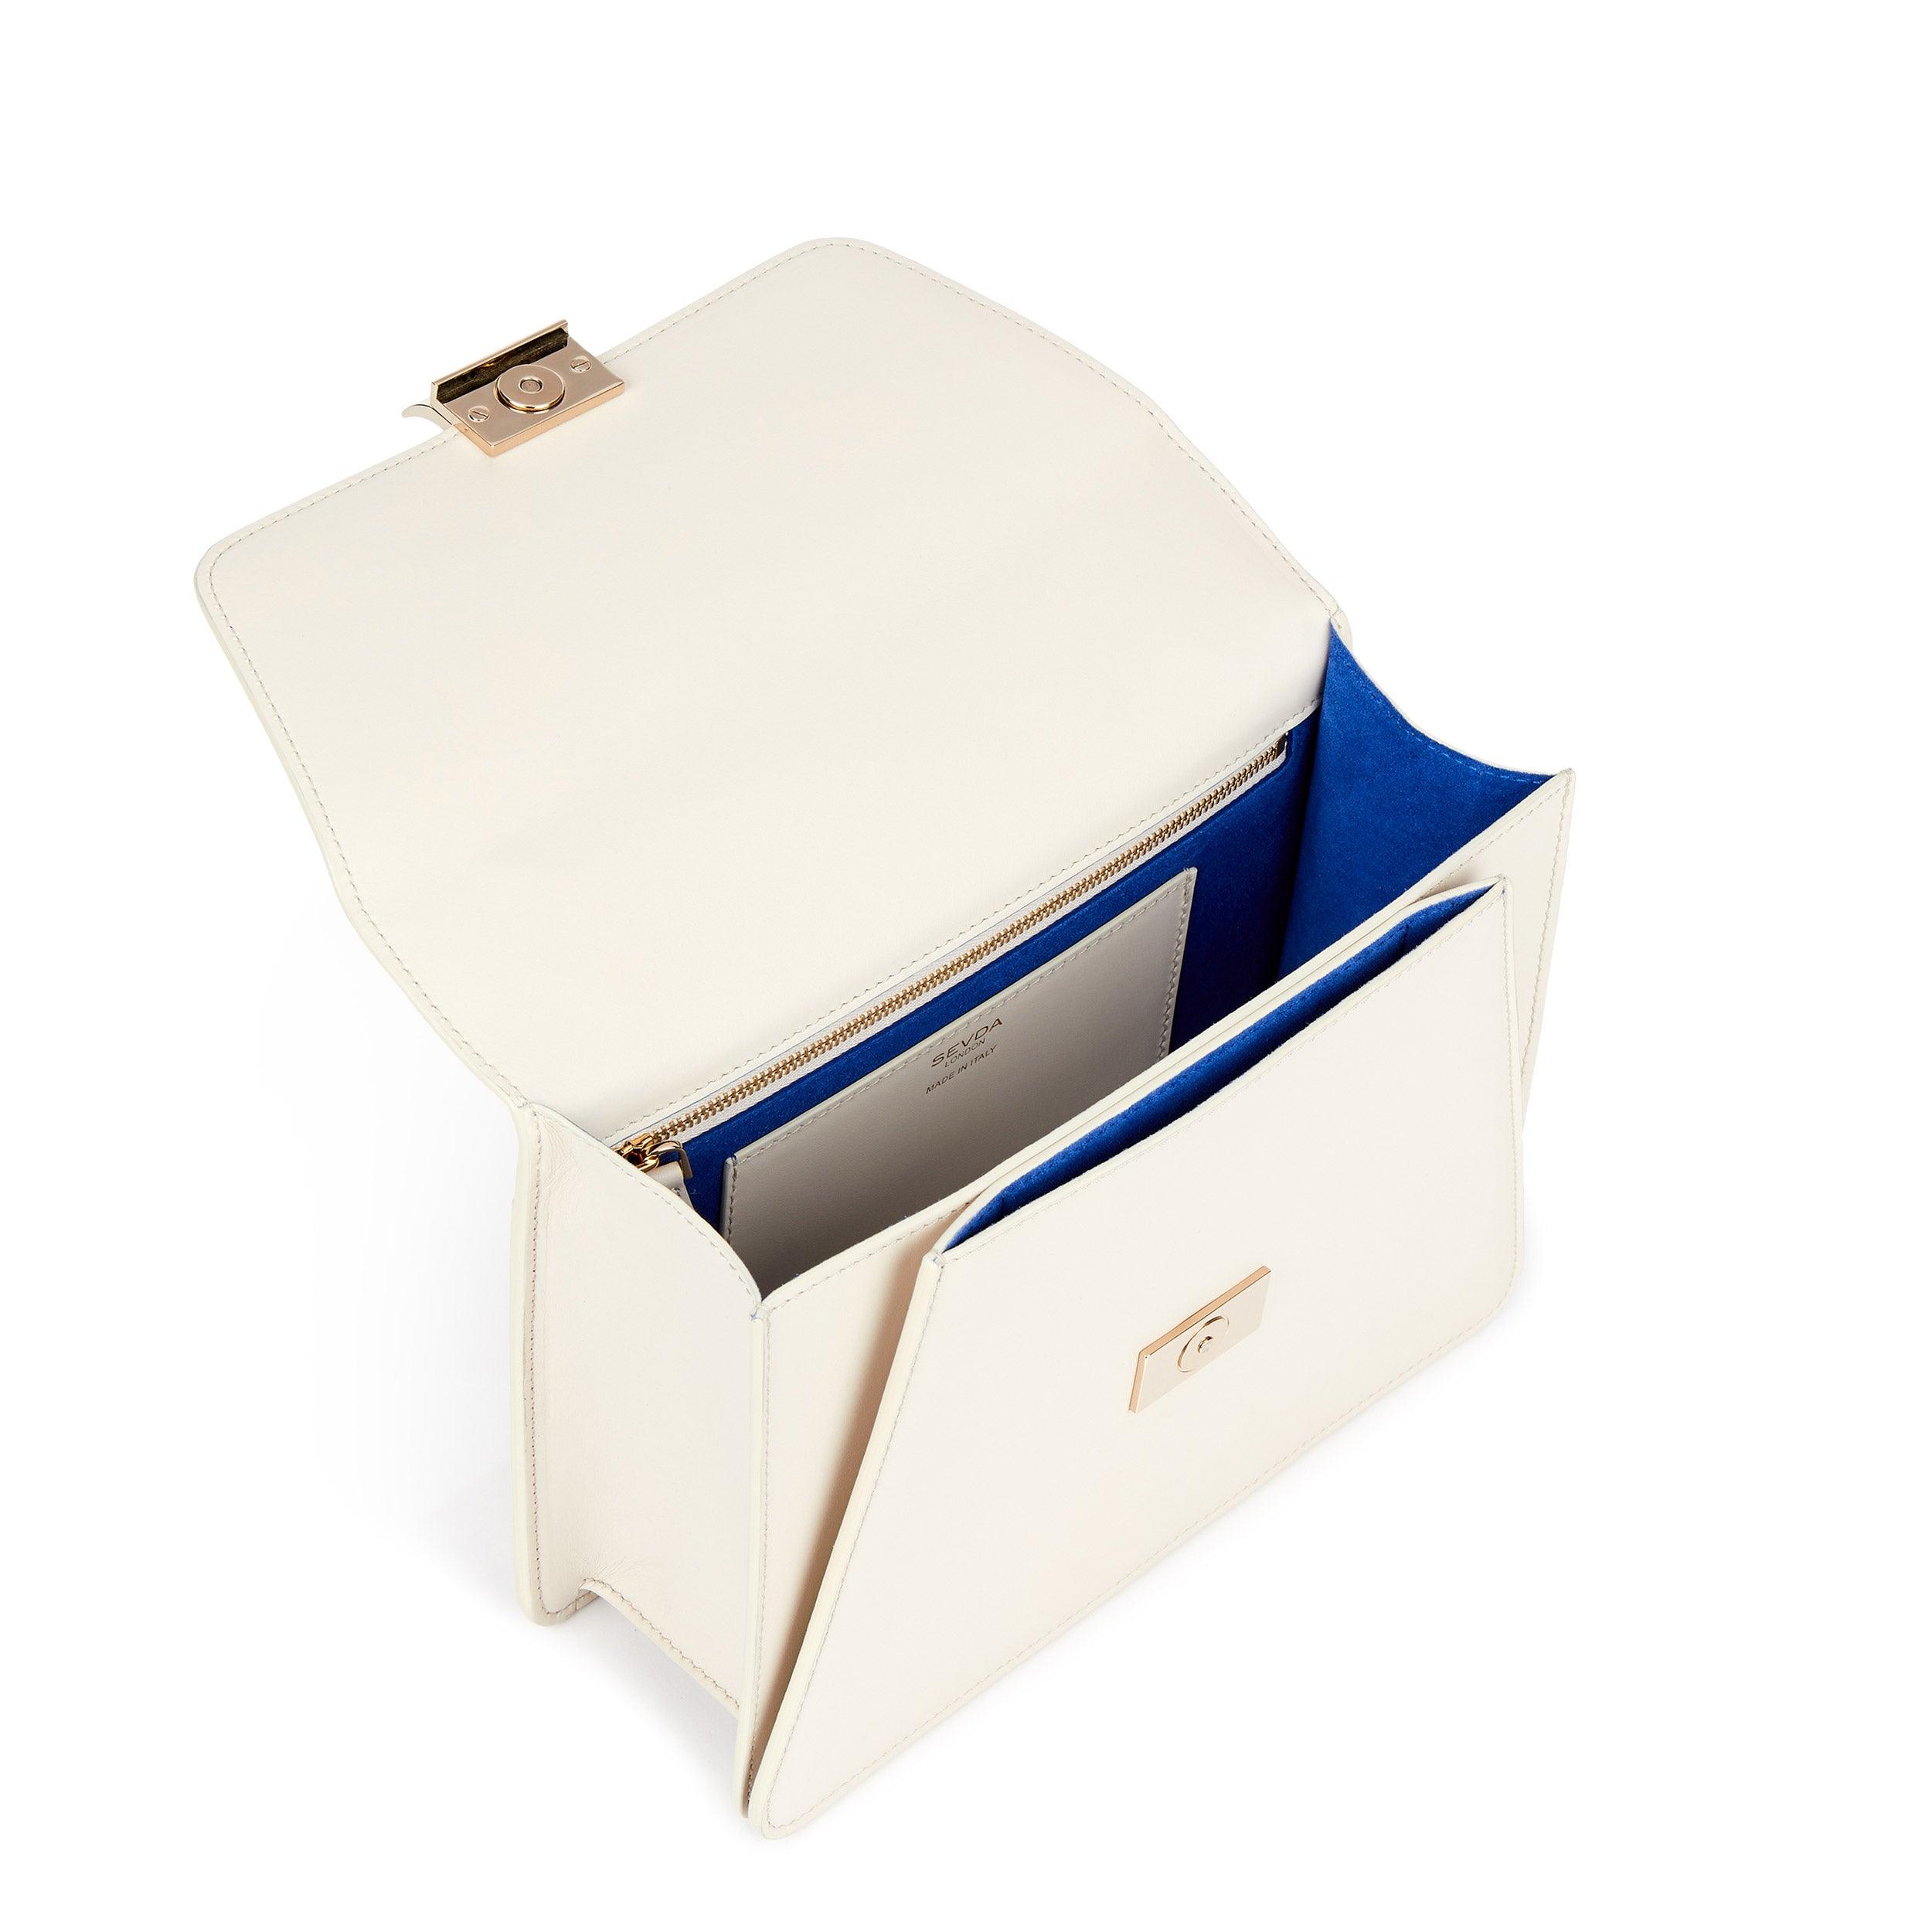 Off White Designer Shoulder Bag with Blue Suede Lining - The fusion of London style and Italian craftsmanship.